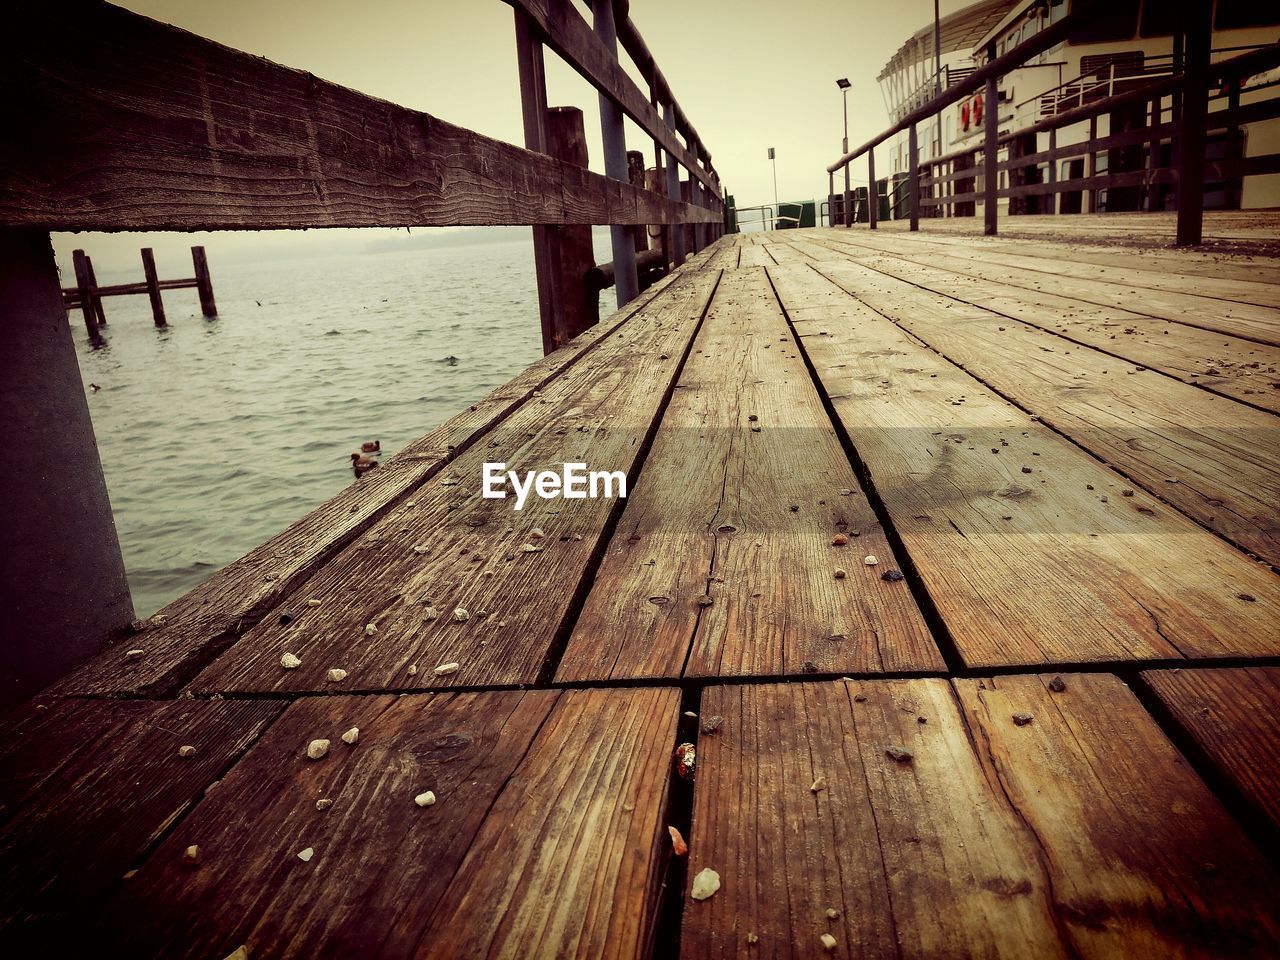 SURFACE LEVEL VIEW OF WOODEN PIER